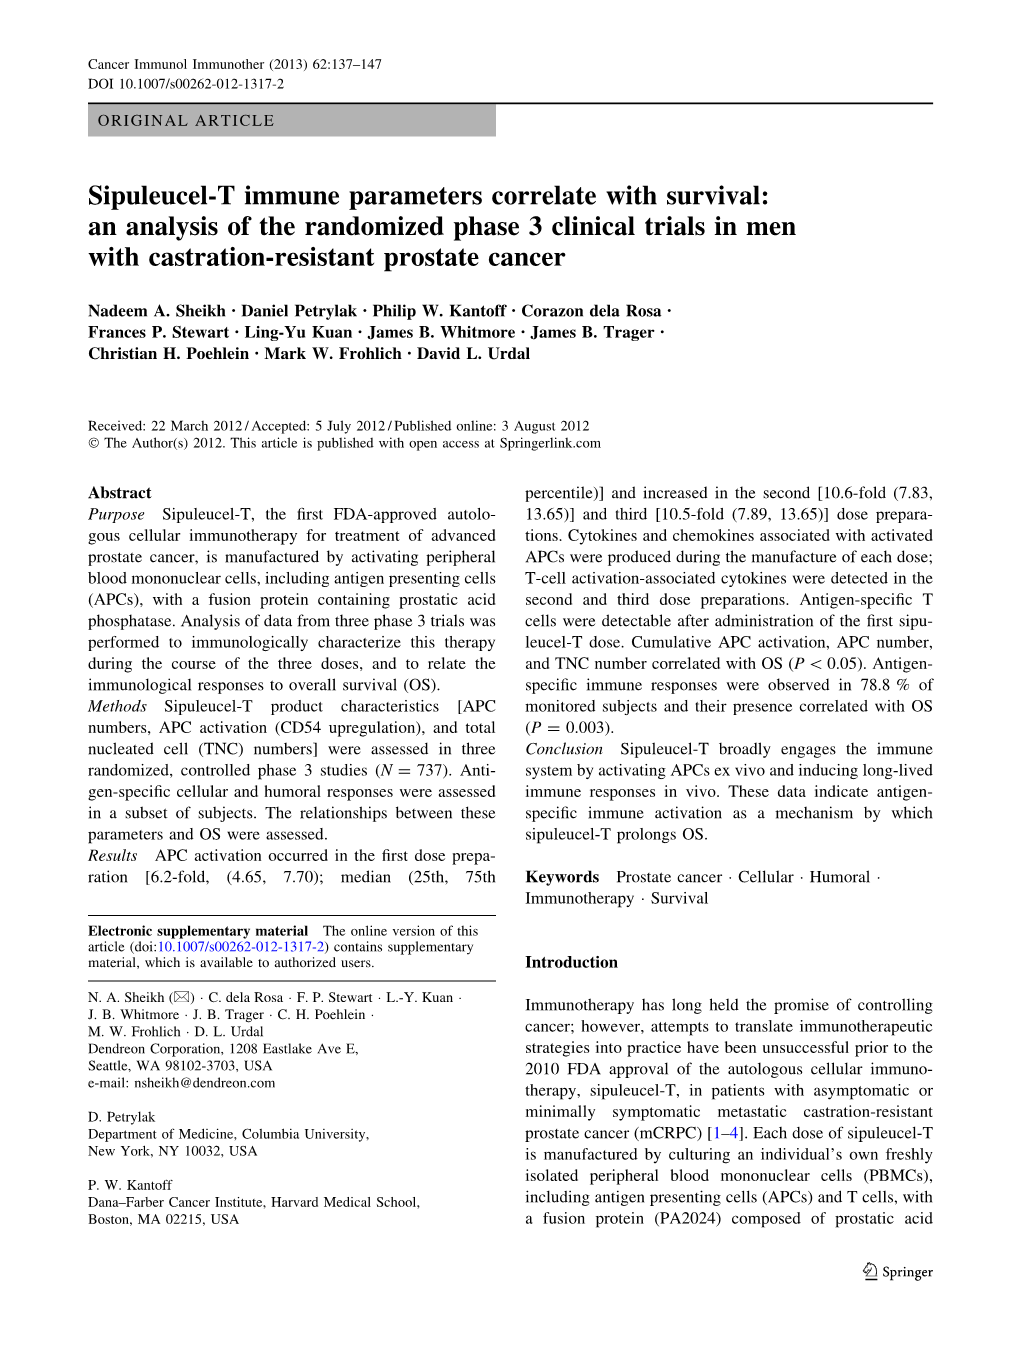 Sipuleucel-T Immune Parameters Correlate with Survival: an Analysis of the Randomized Phase 3 Clinical Trials in Men with Castration-Resistant Prostate Cancer